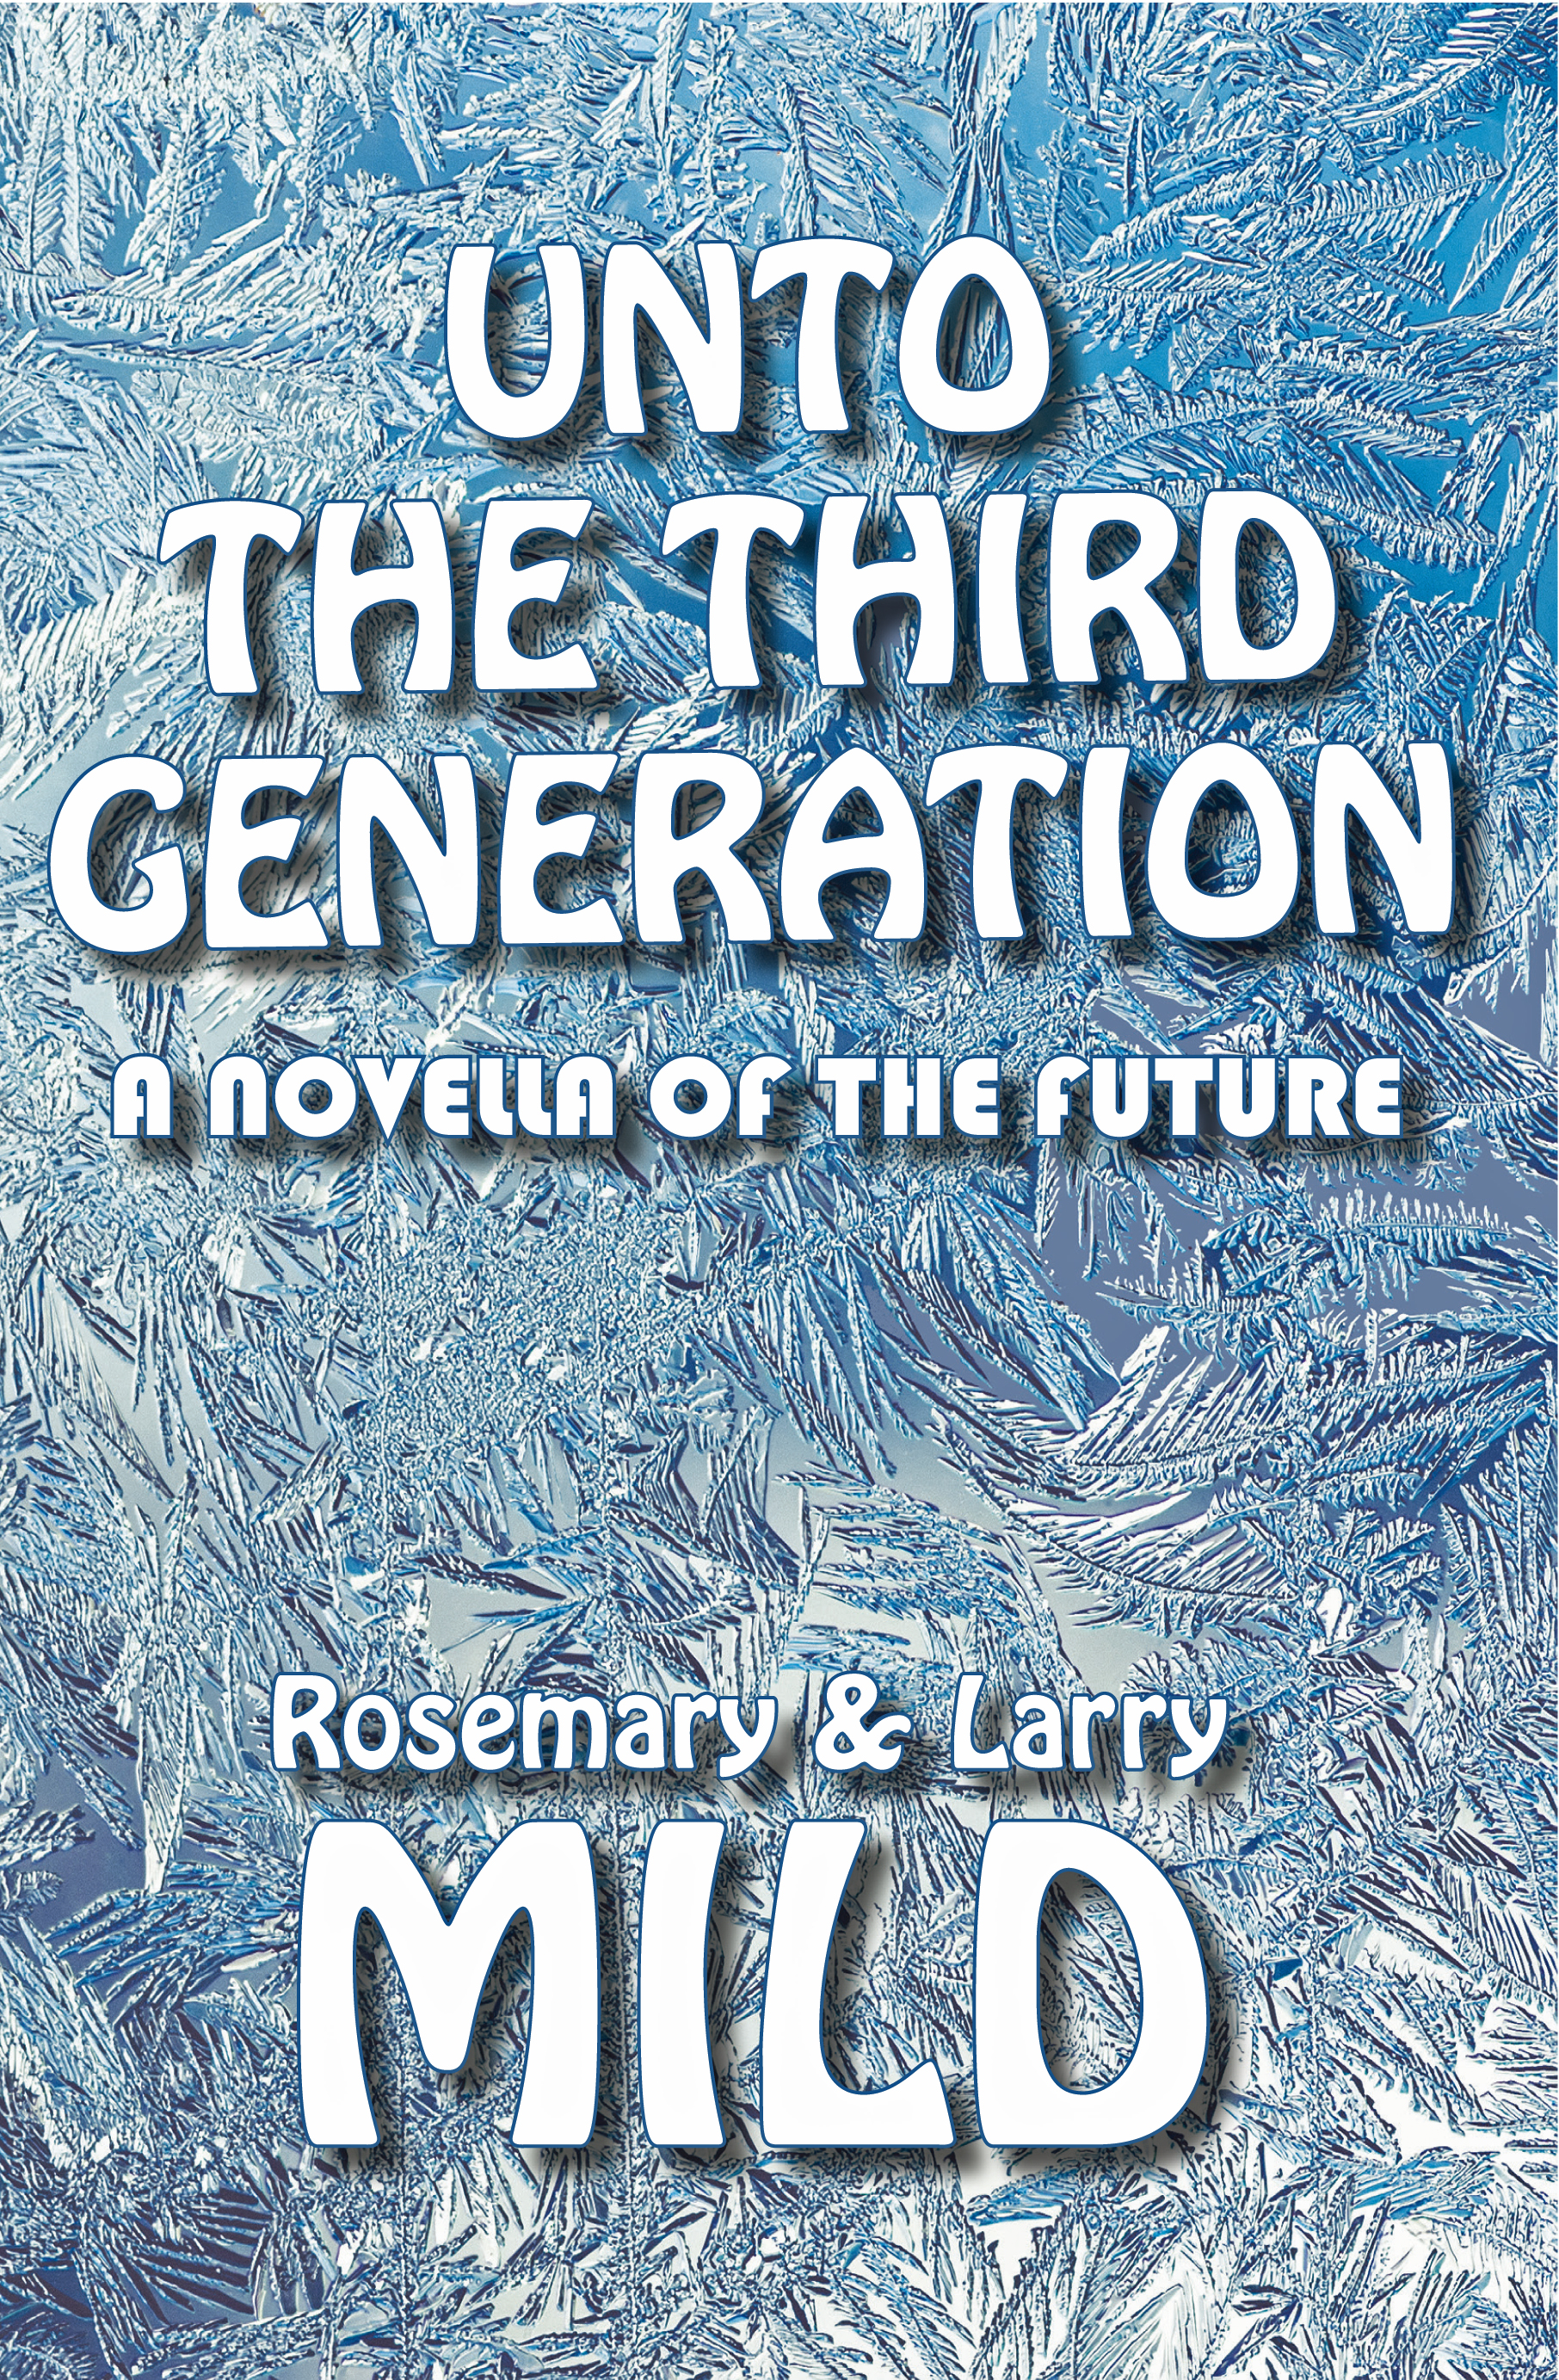 <i><b>Unto the Third Generation, A Novella of the Future</b></i> by Rosemary and Larry Mild